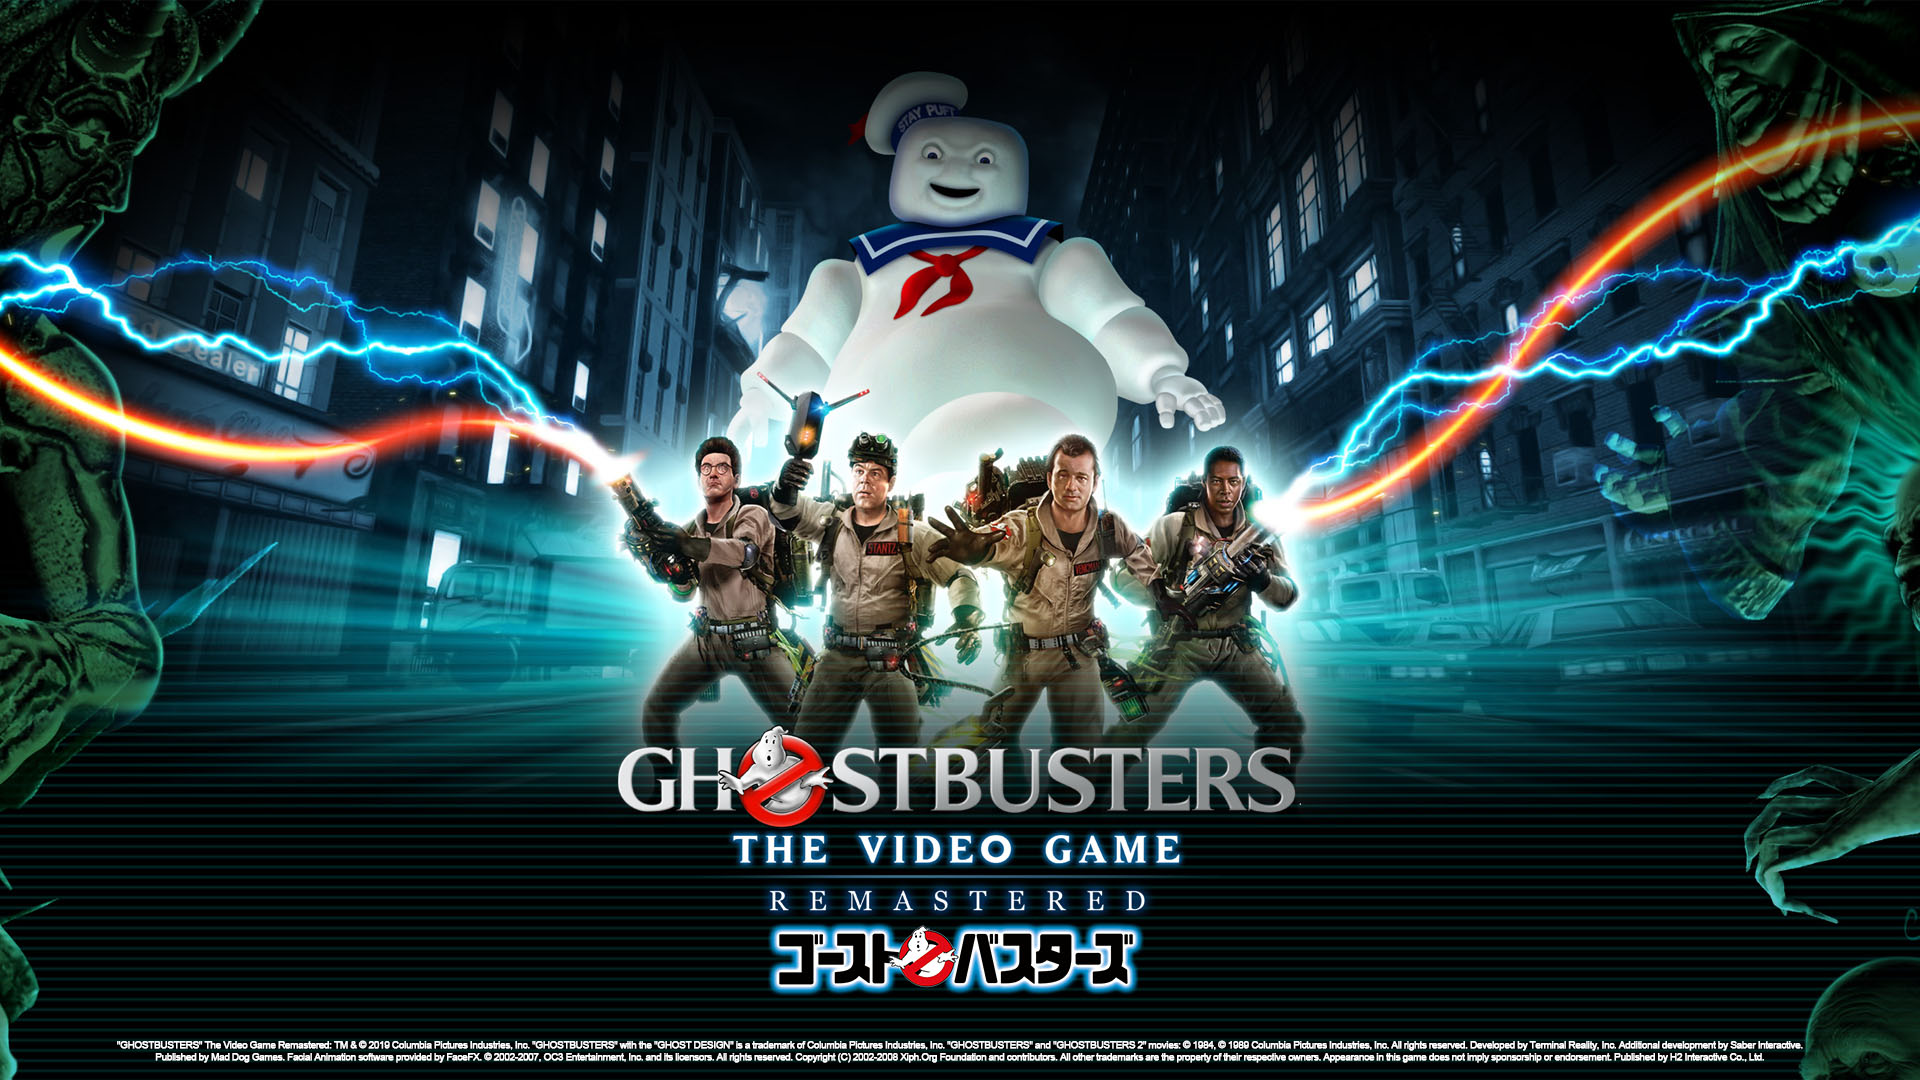 Ghostbusters: The Video Game Remastered」プレイレポート。ゴースト